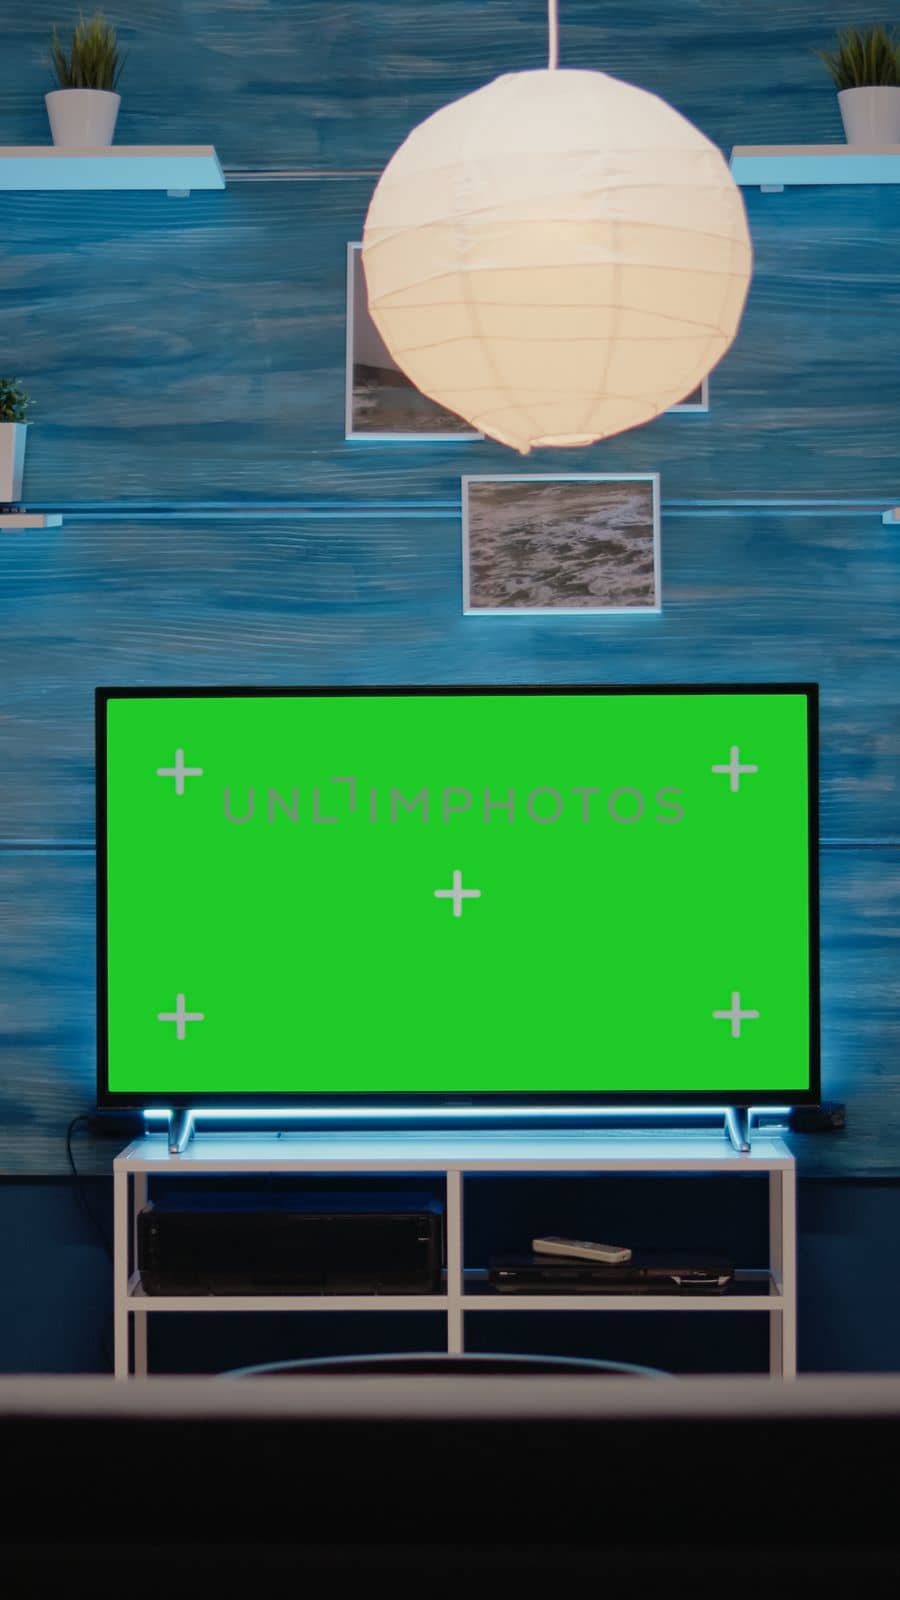 Green screen design on television in empty room by DCStudio